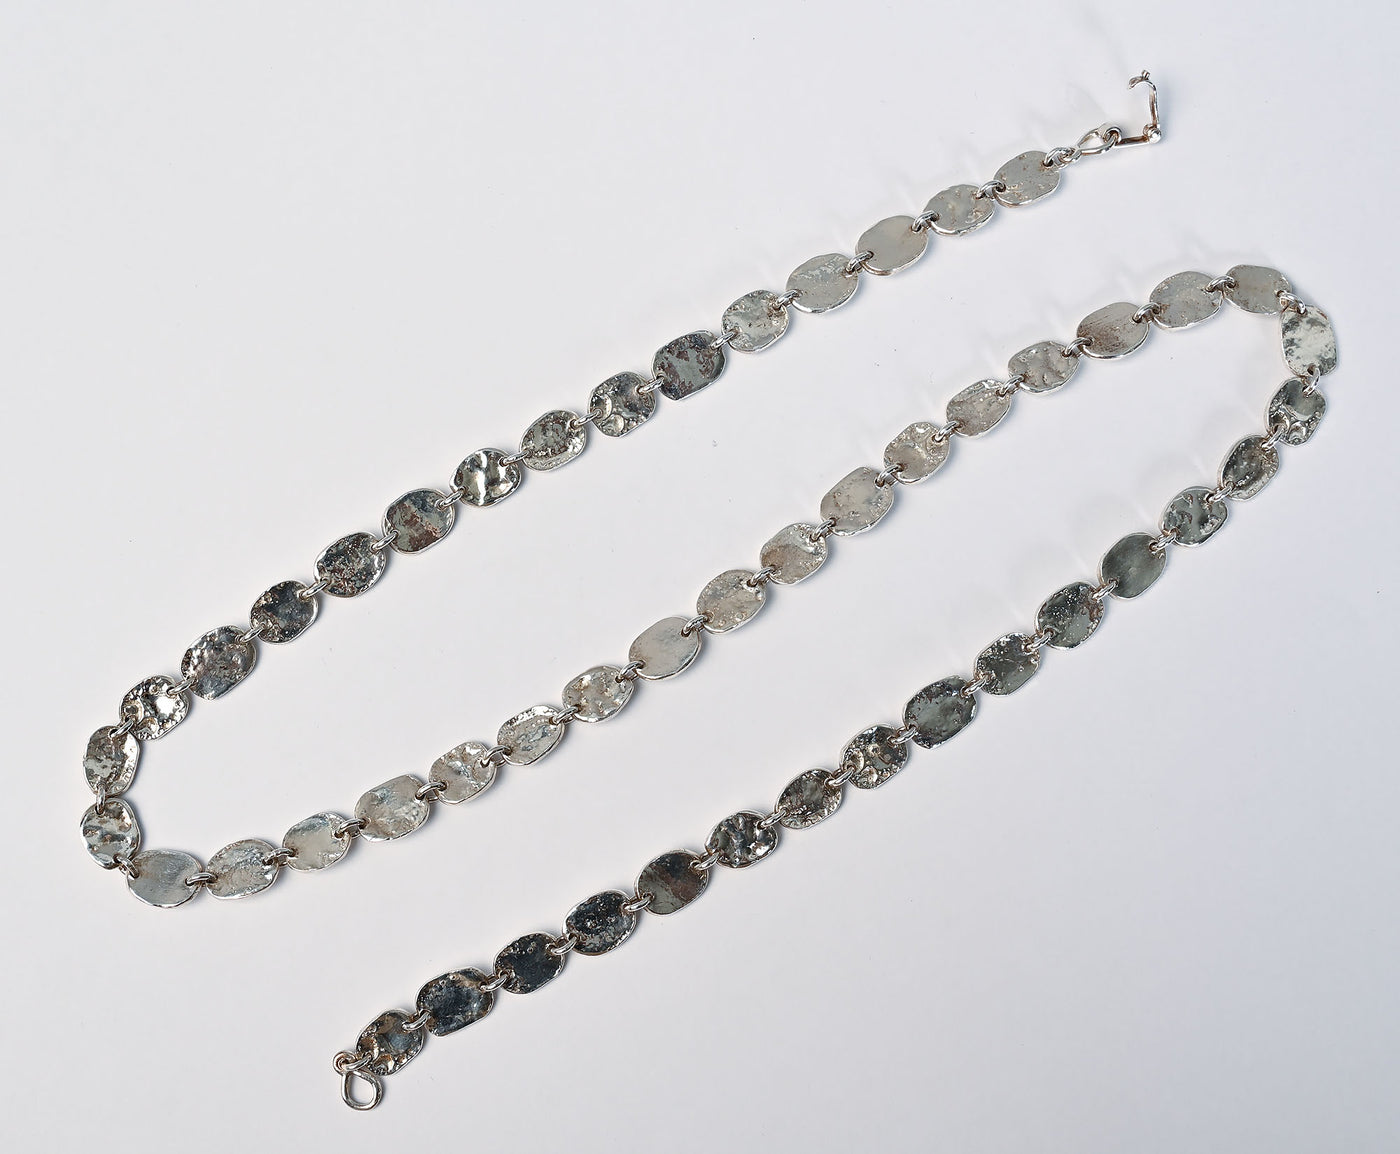 Open clasp top view of Tane Oval Links Silver Necklace.